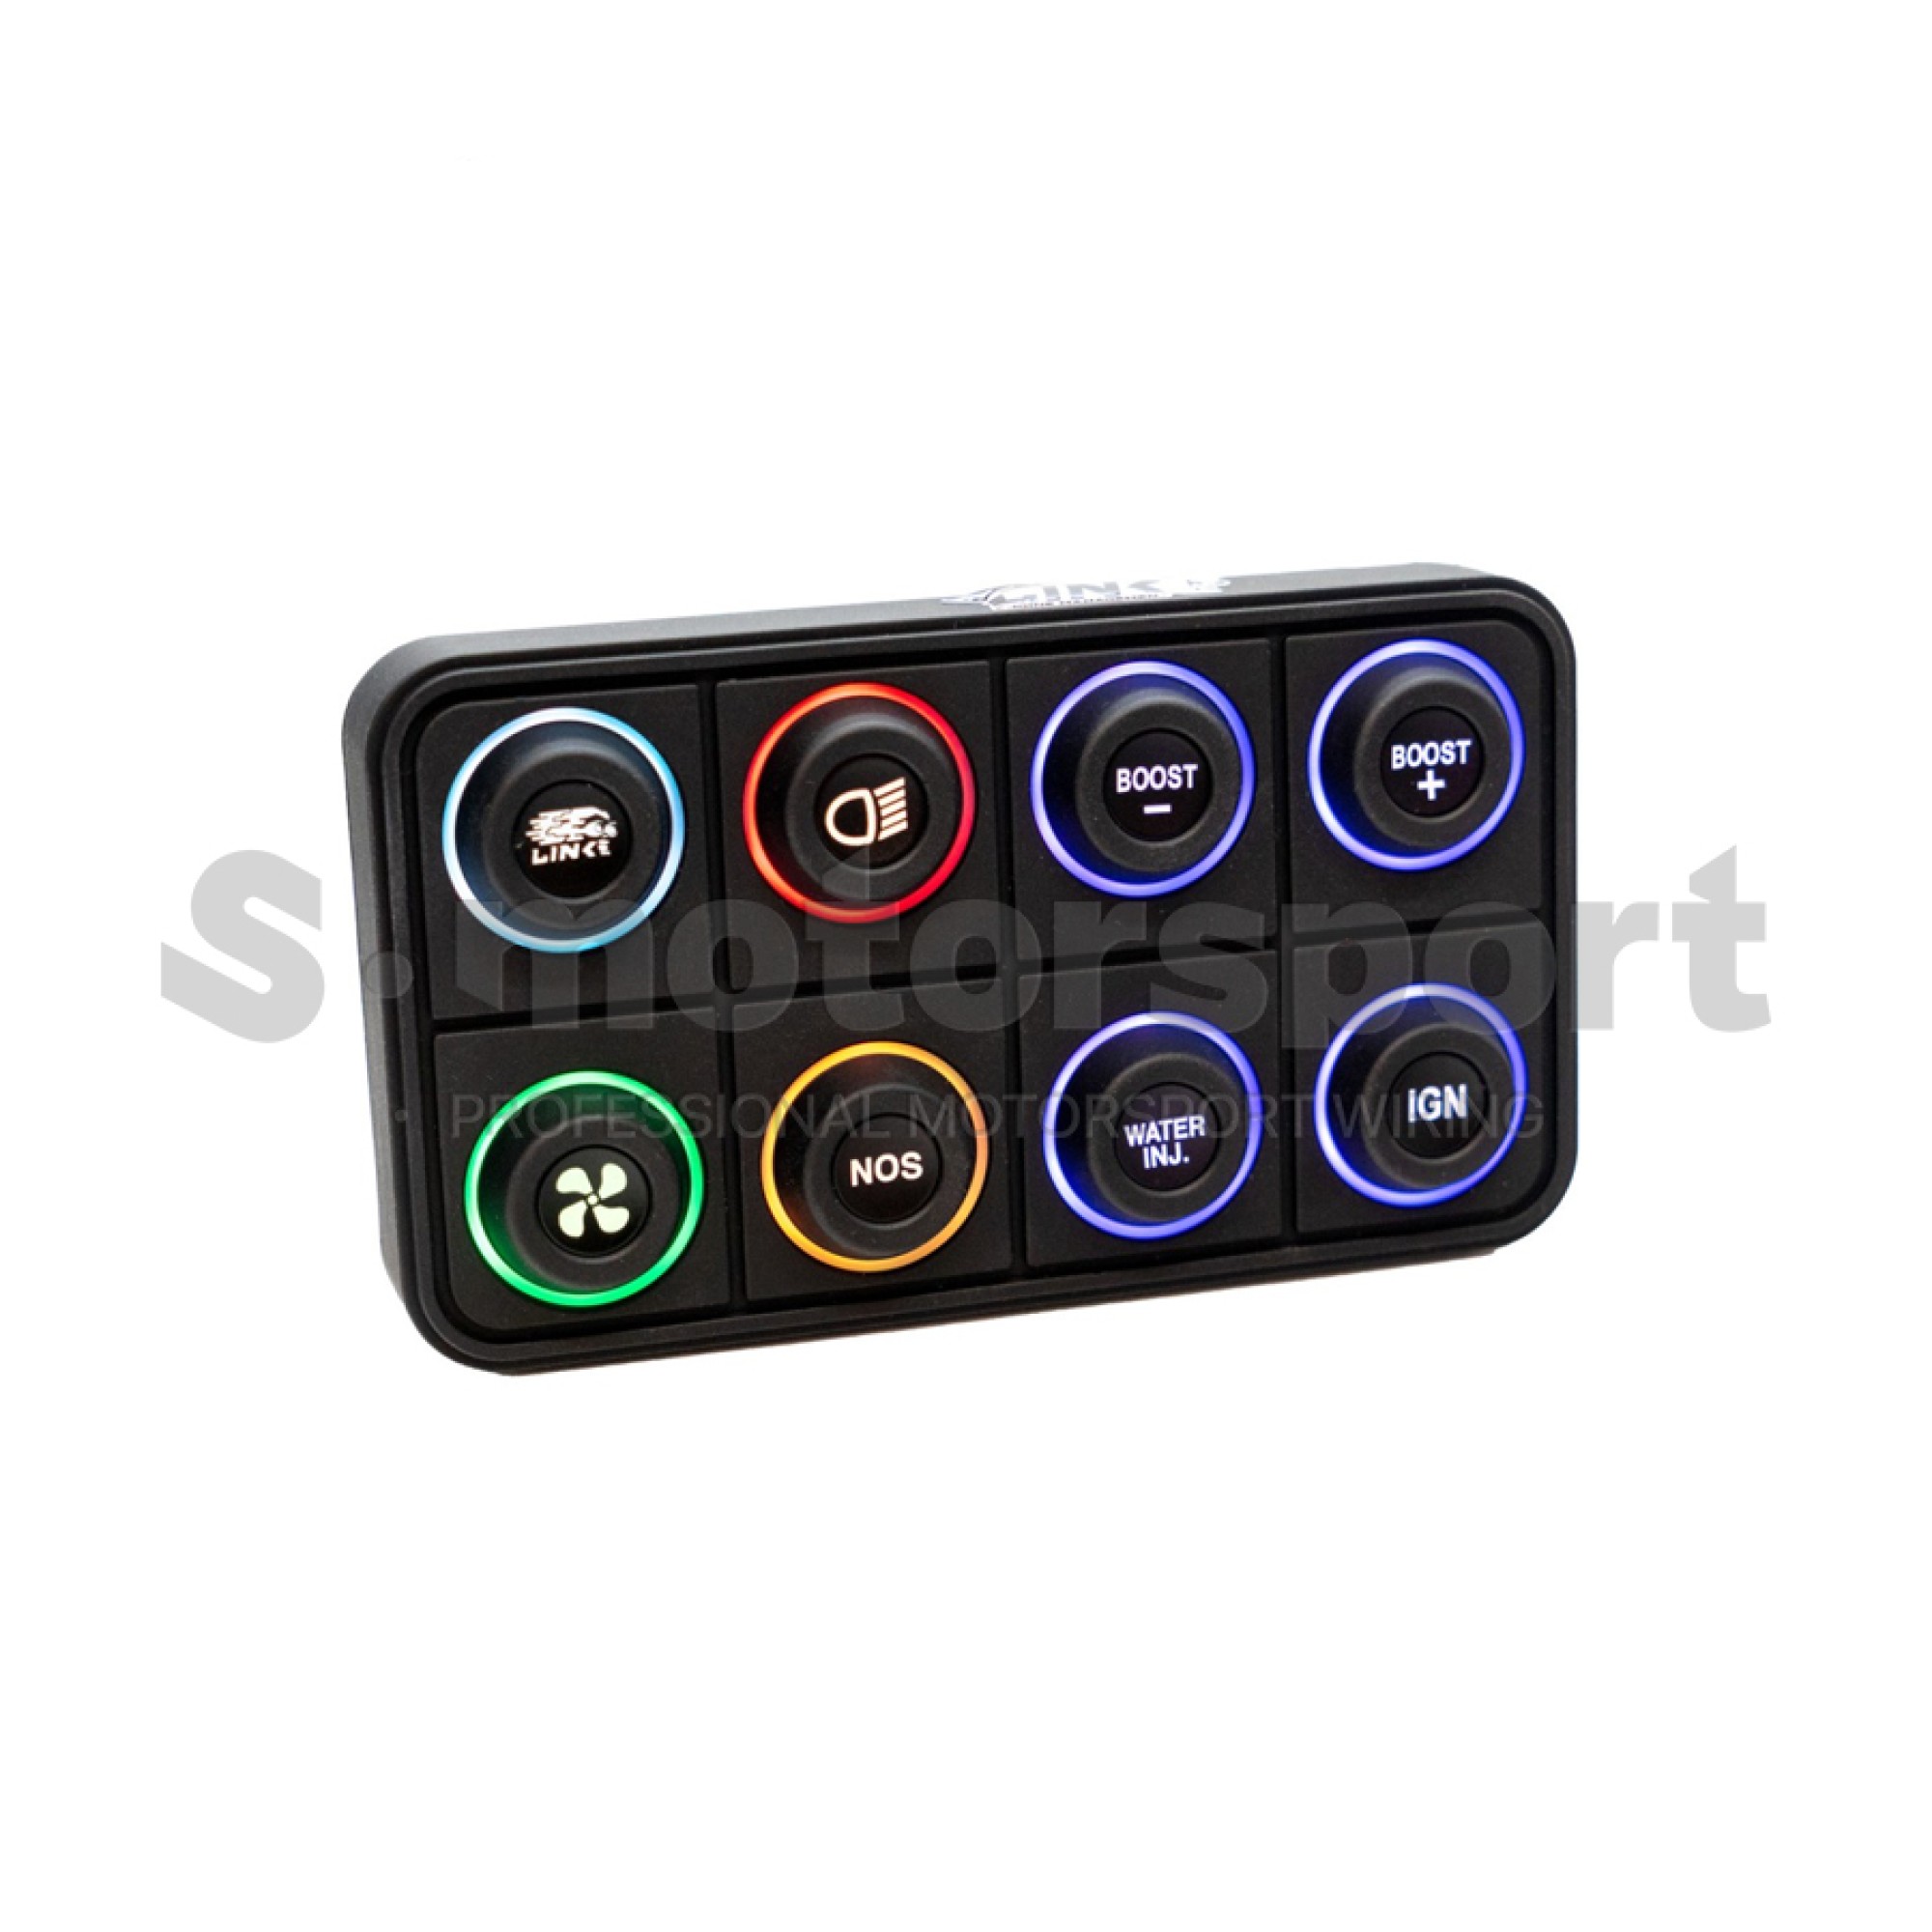 Link CAN Keypad 8 Button